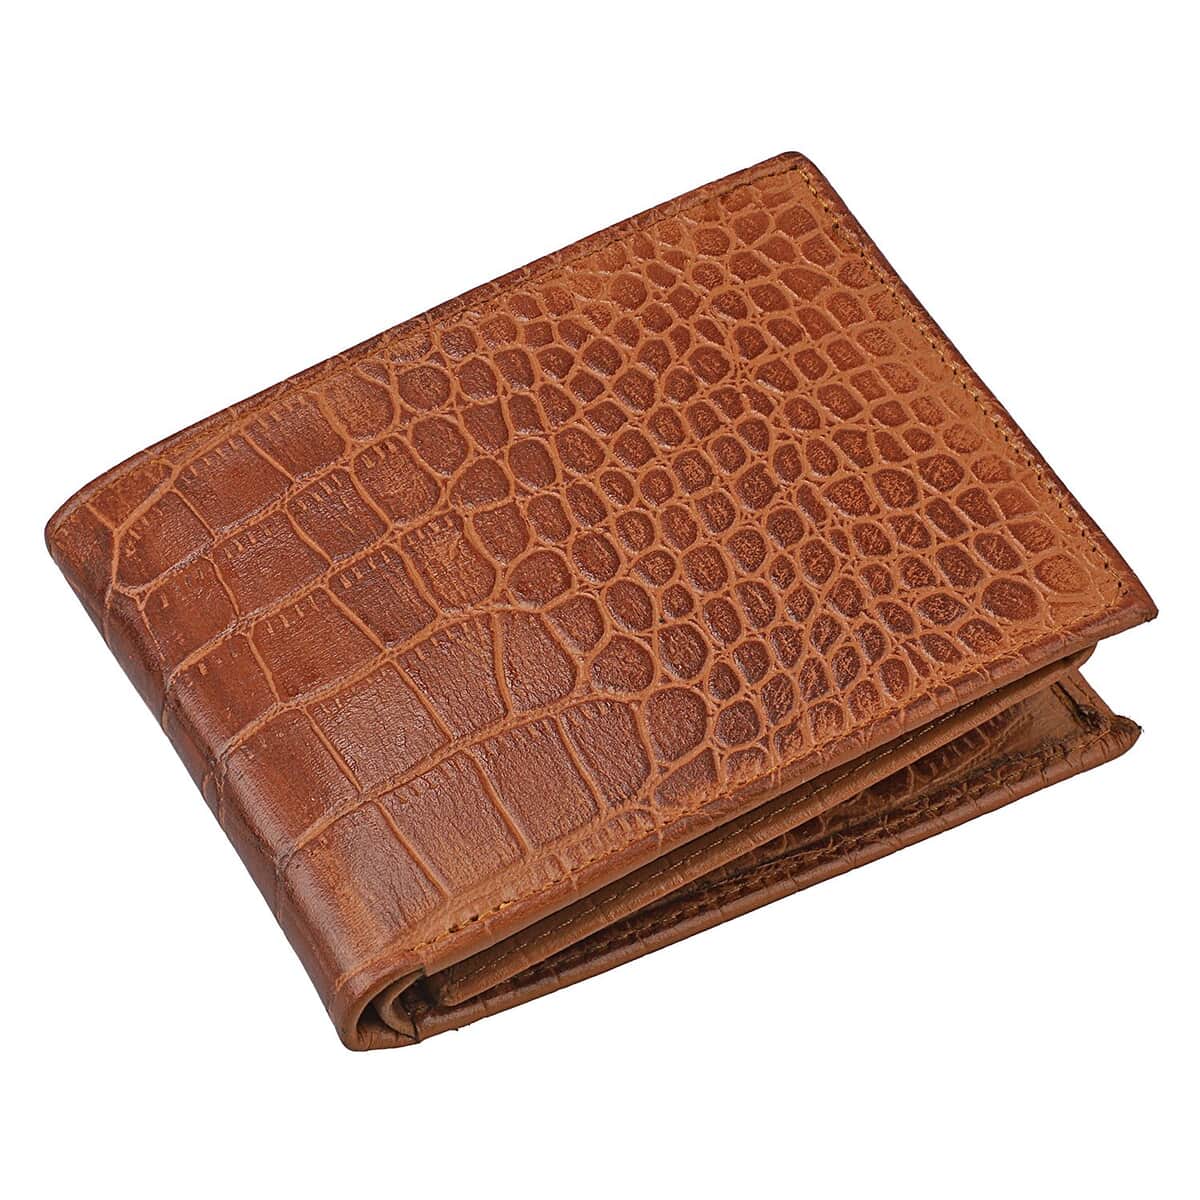 UNION CODE Tan Croco Embossed Genuine Leather RFID Bi Fold Men's Wallet | Leather Card Holder Travel Wallet | Leather Purse for Men image number 0